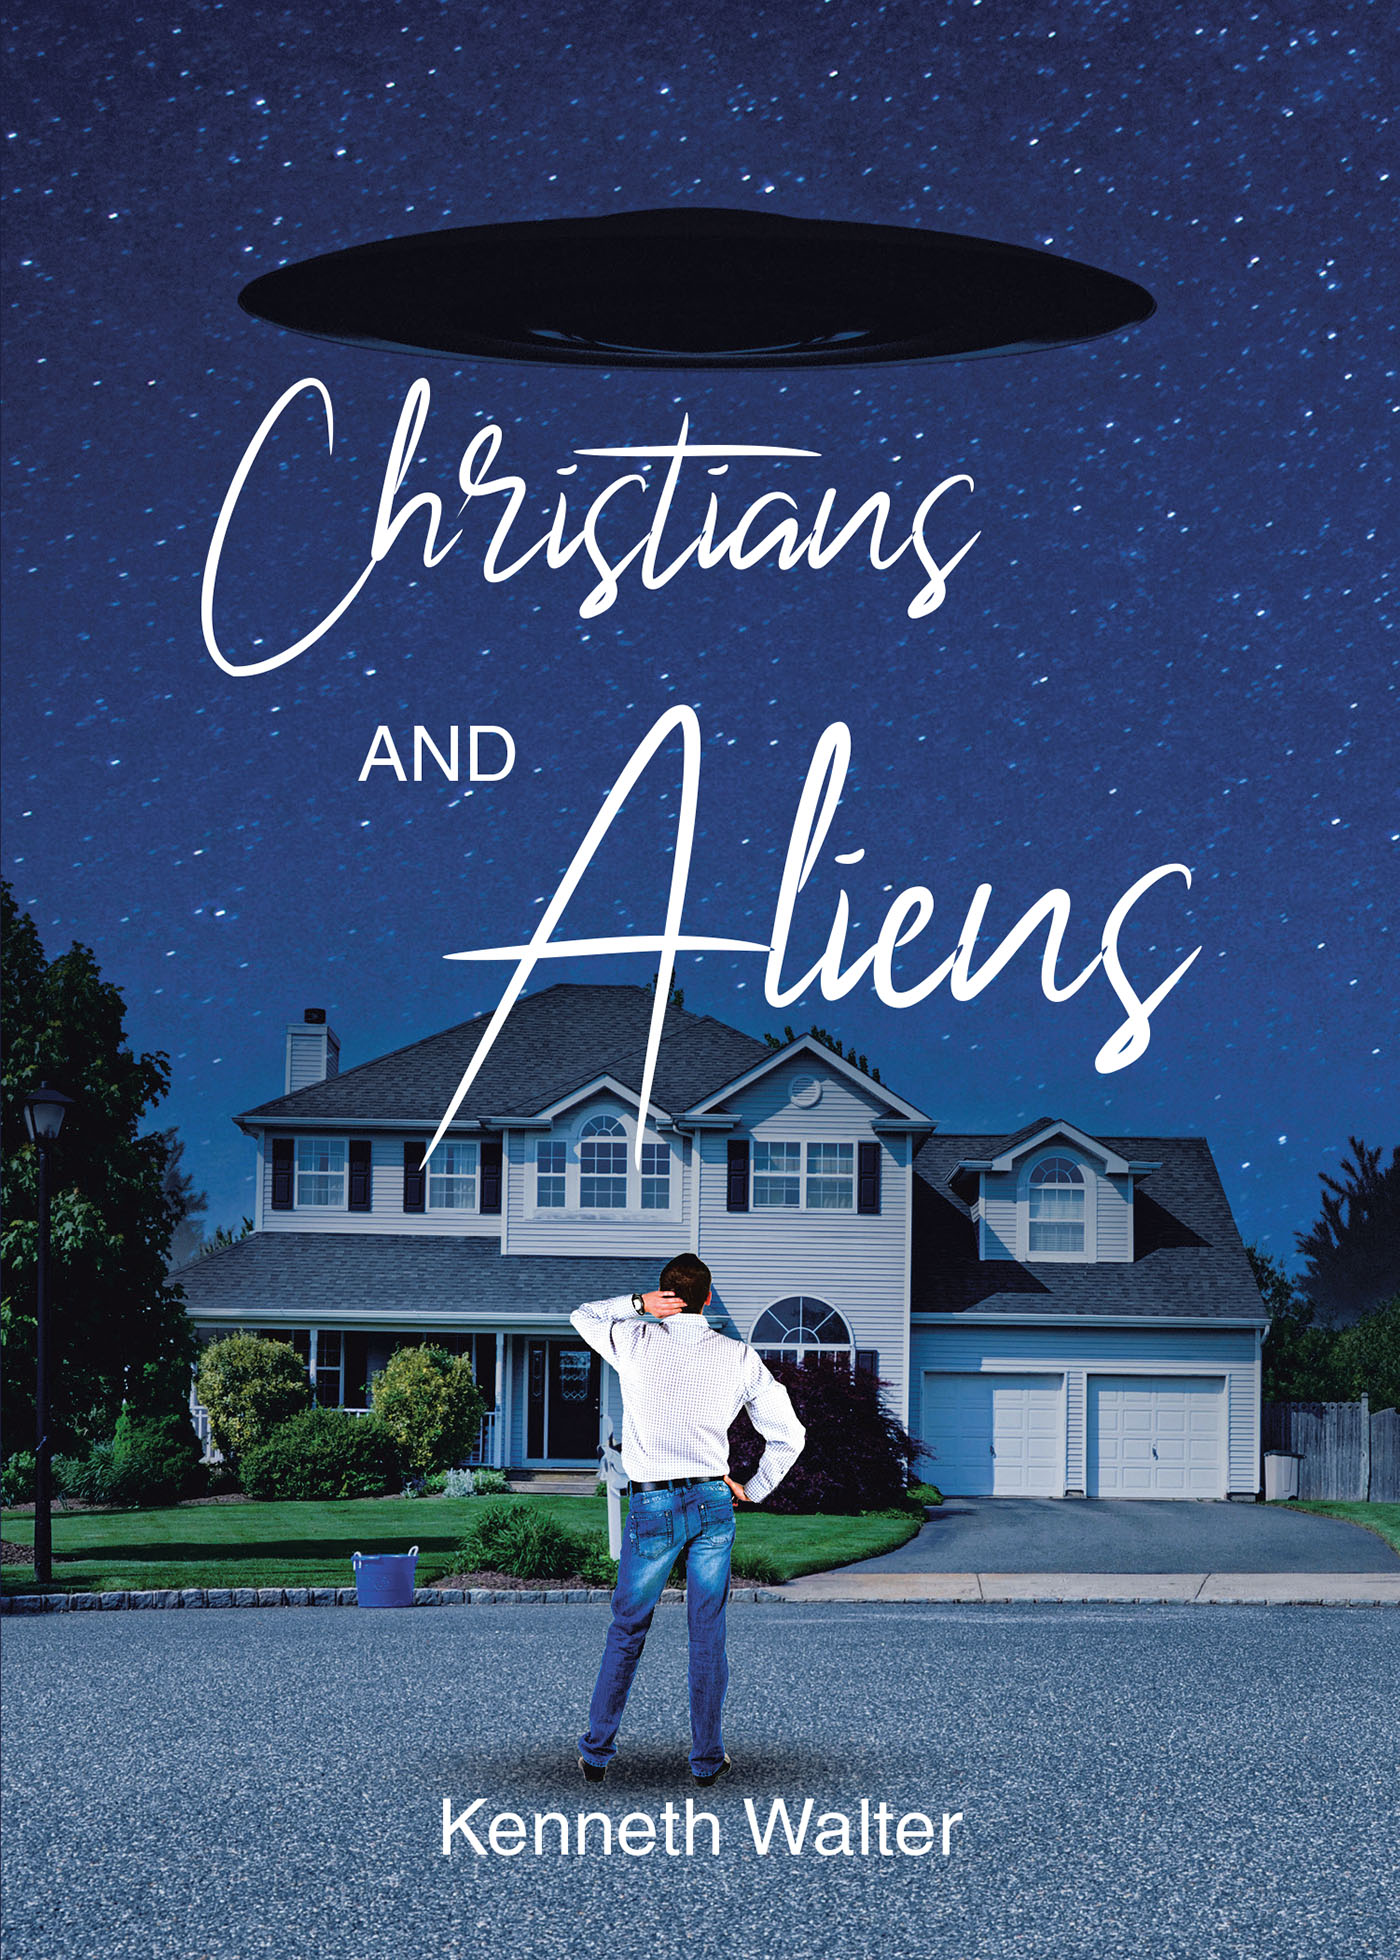 Kenneth Walter’s Newly Released "Christians and Aliens" is a Creative Tale of the Unknown and the Spiritual